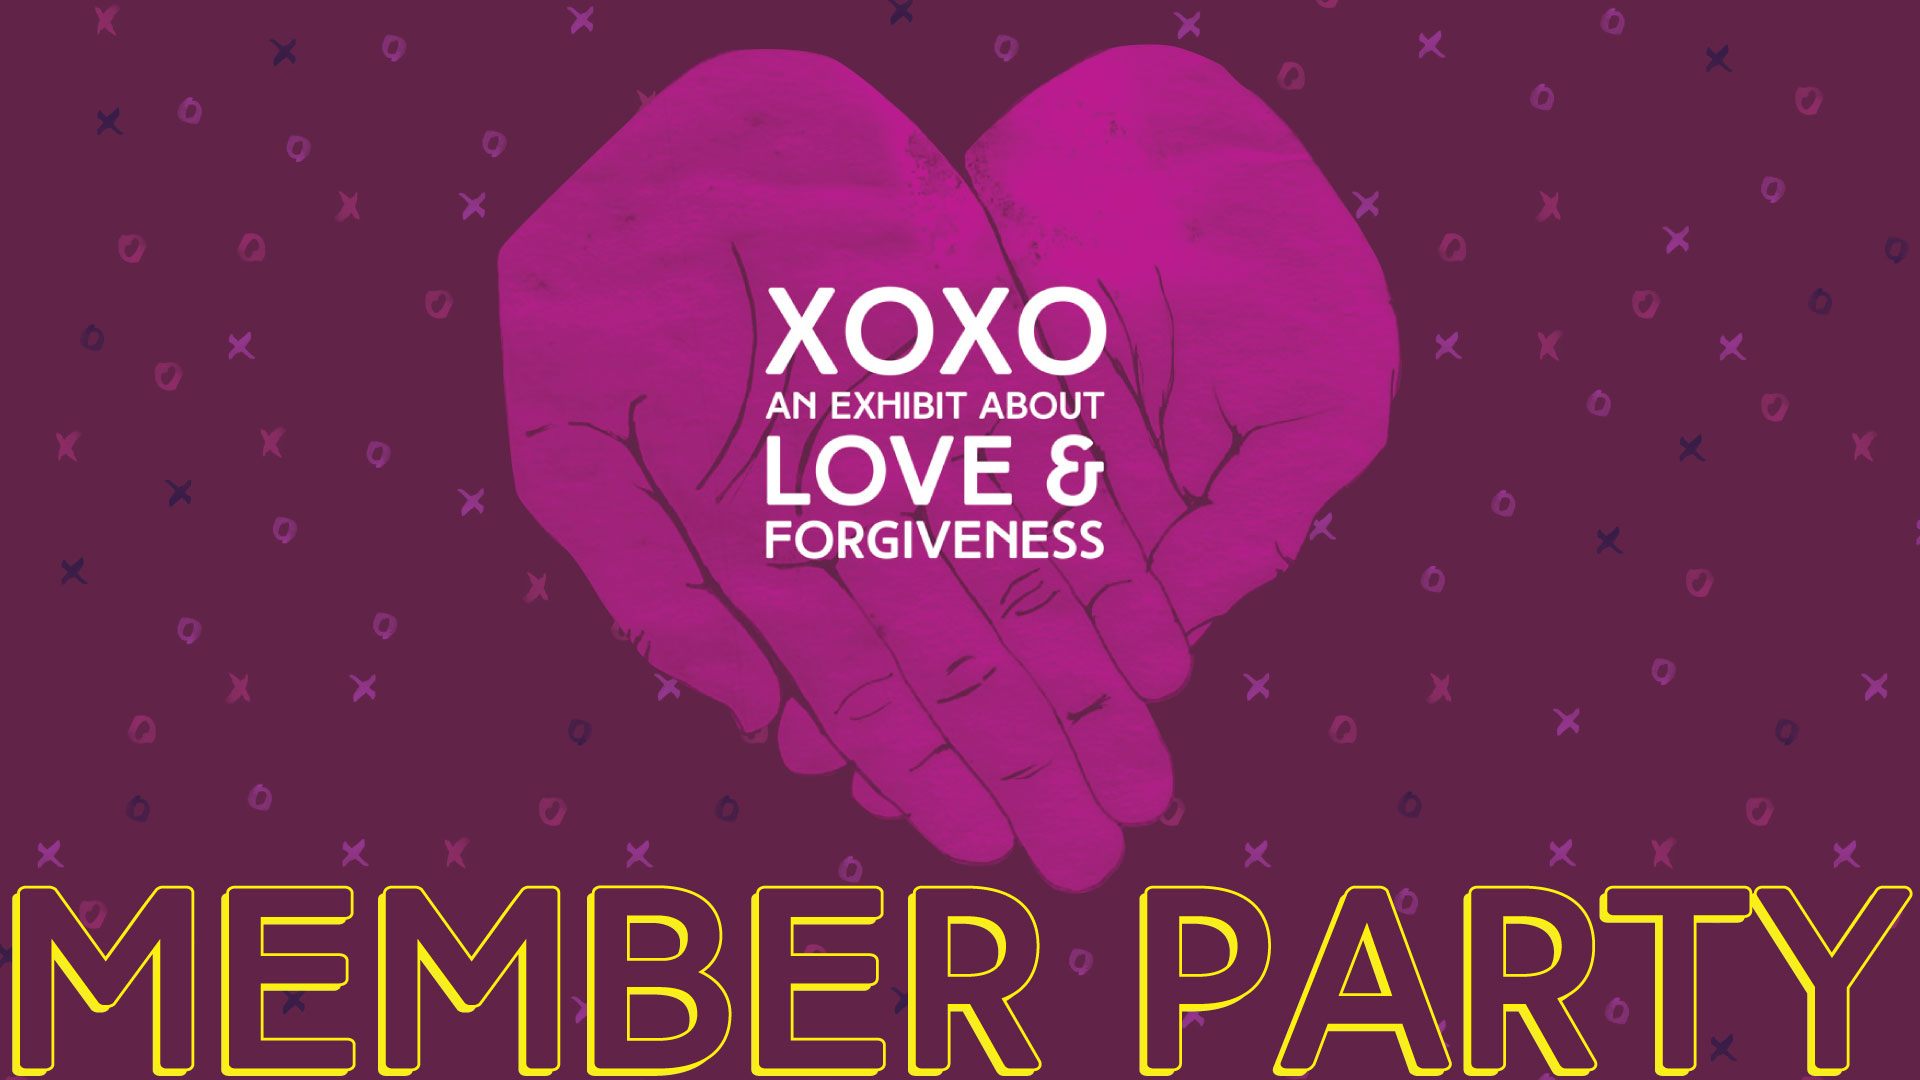 XOXO: An exhibit about love and forgiveness, MEMBER PARTY